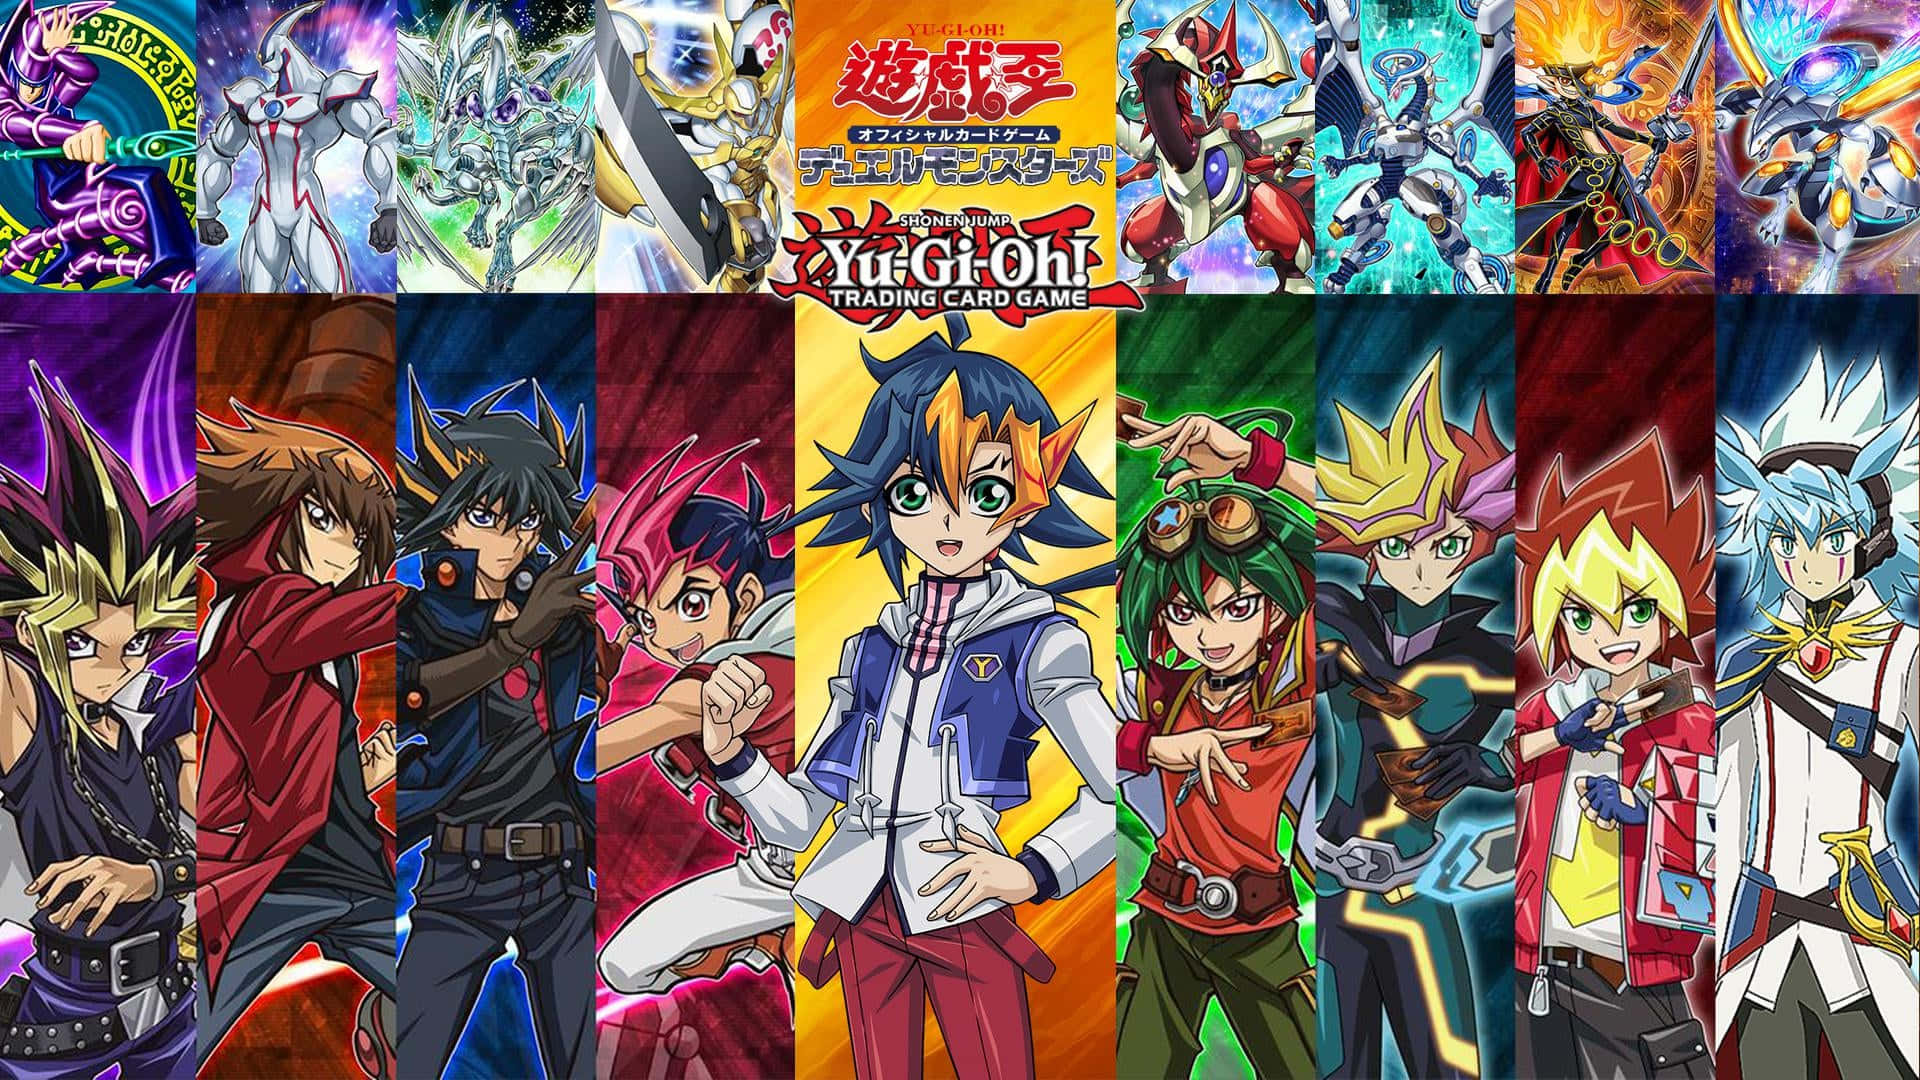 Download Learn the way of the cards with Yugioh! 